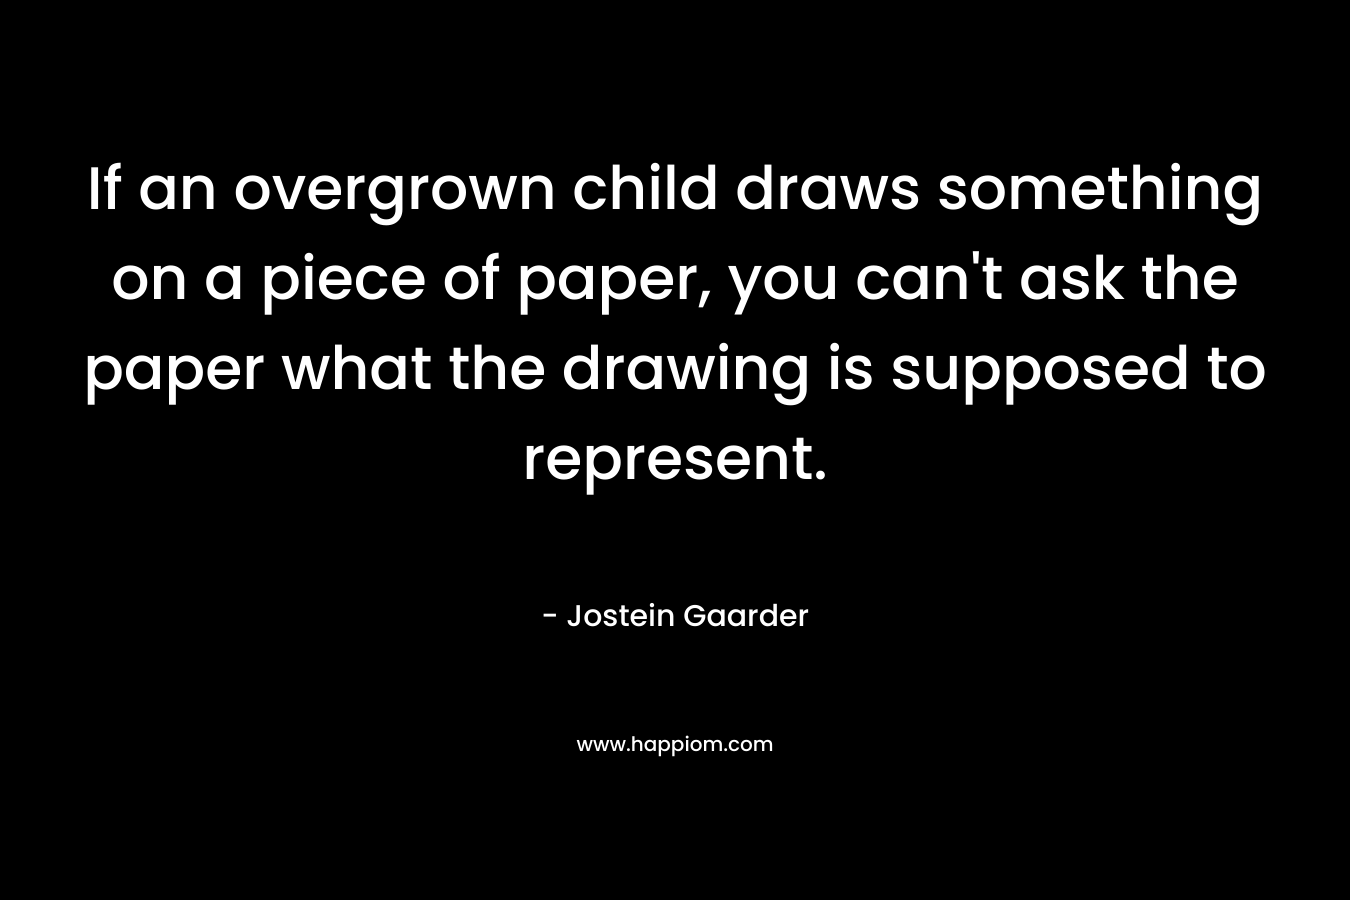 If an overgrown child draws something on a piece of paper, you can’t ask the paper what the drawing is supposed to represent. – Jostein Gaarder